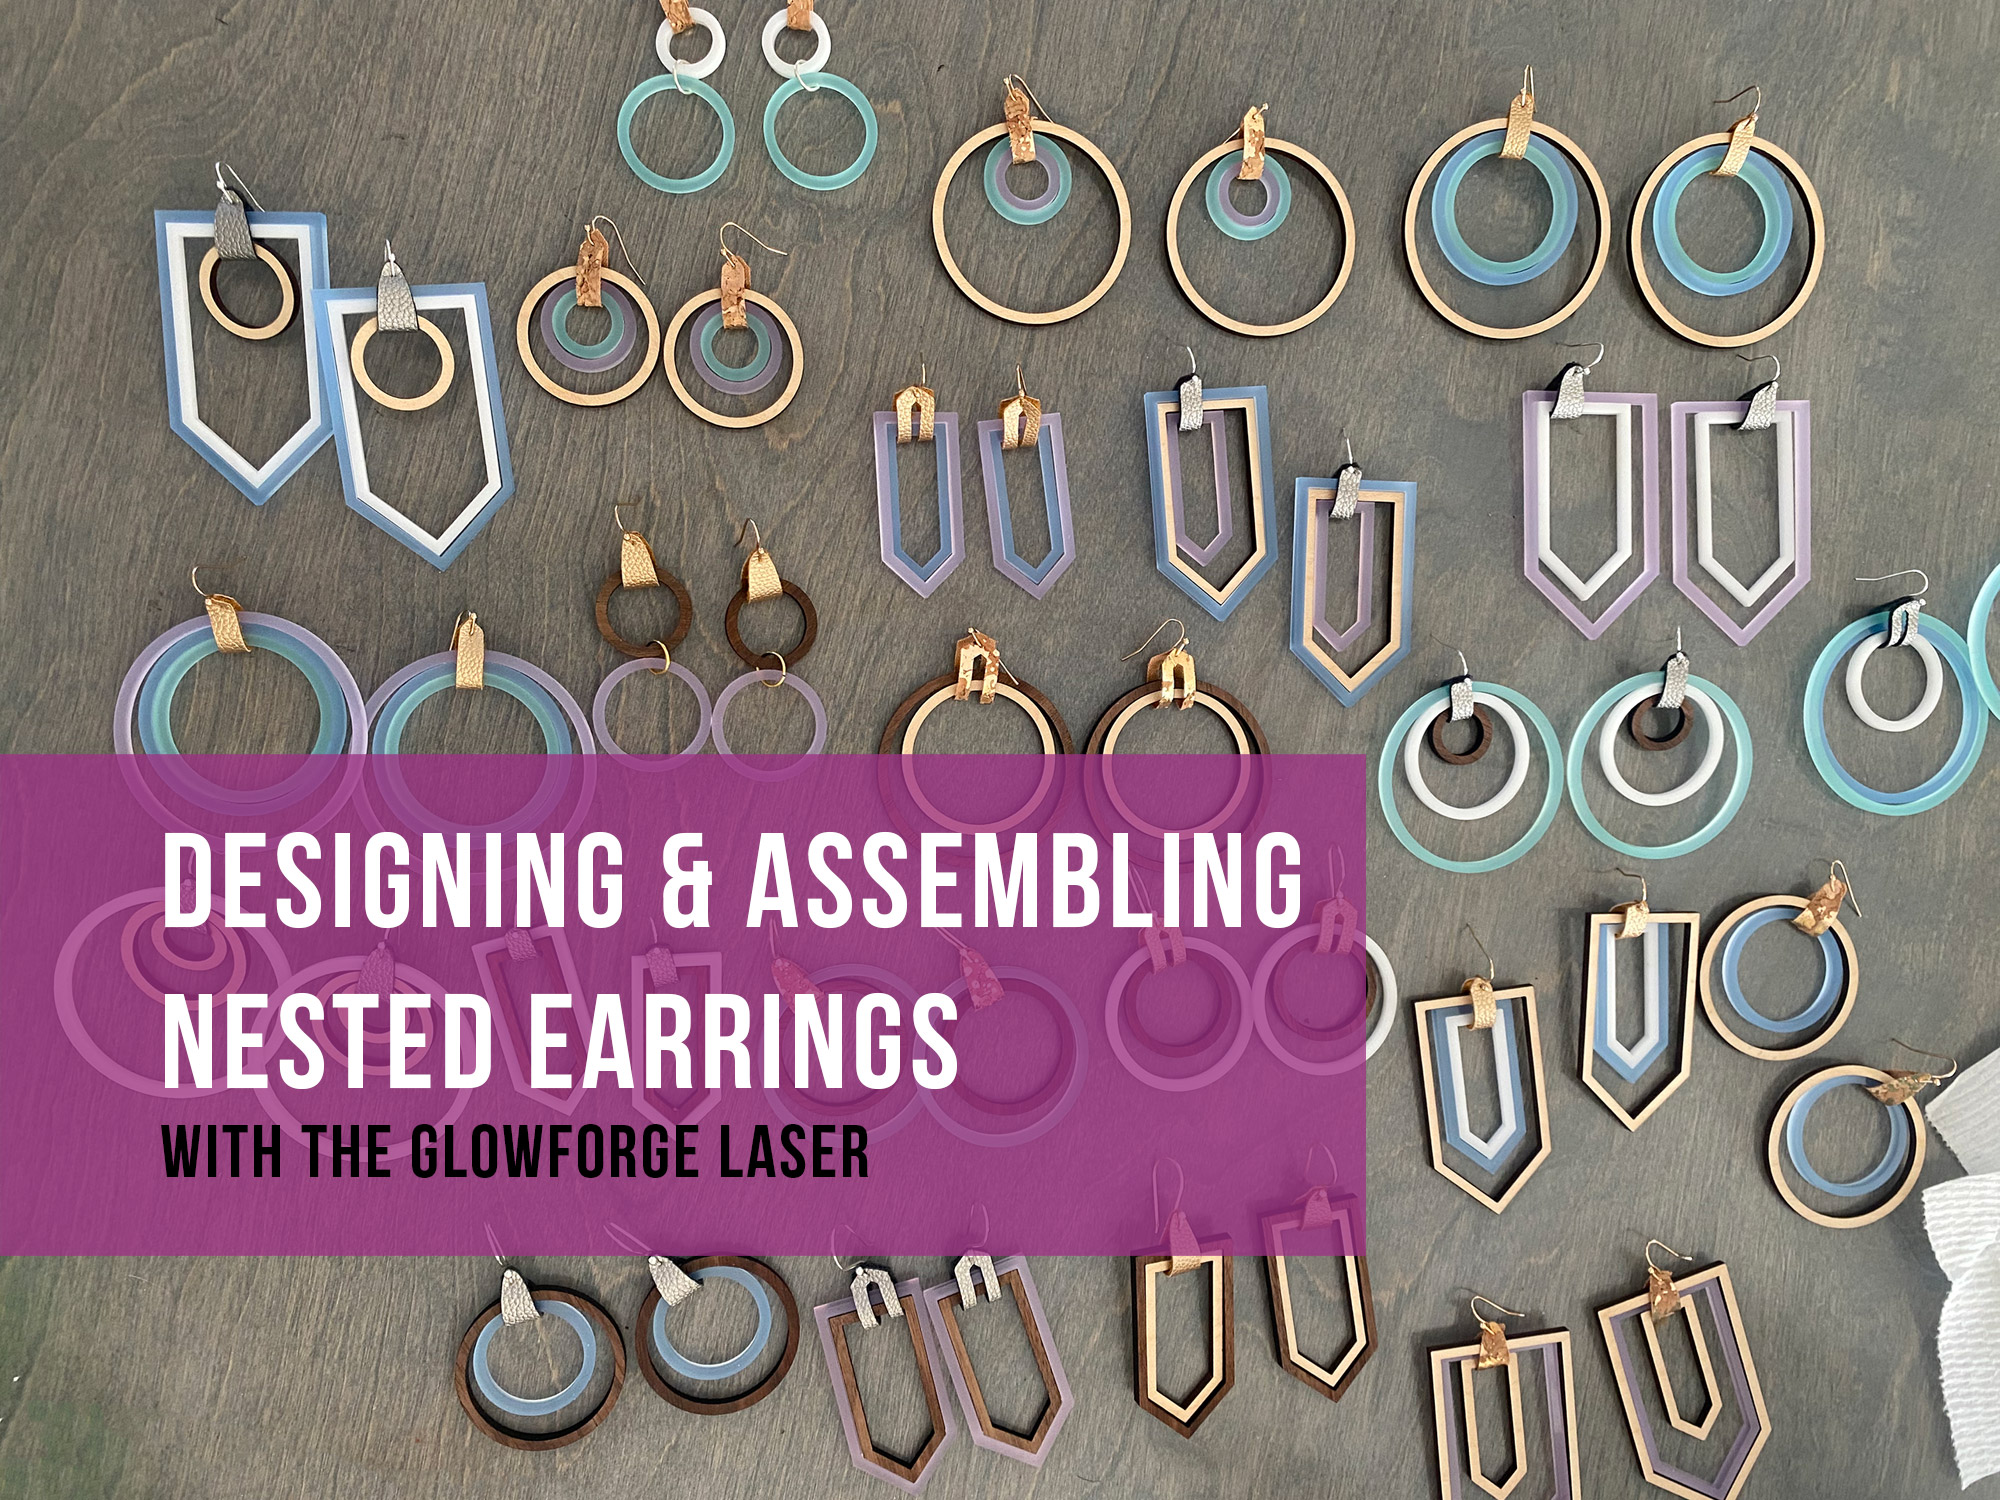 Designing and Assembling Nested Earrings for the Glowforge Laser